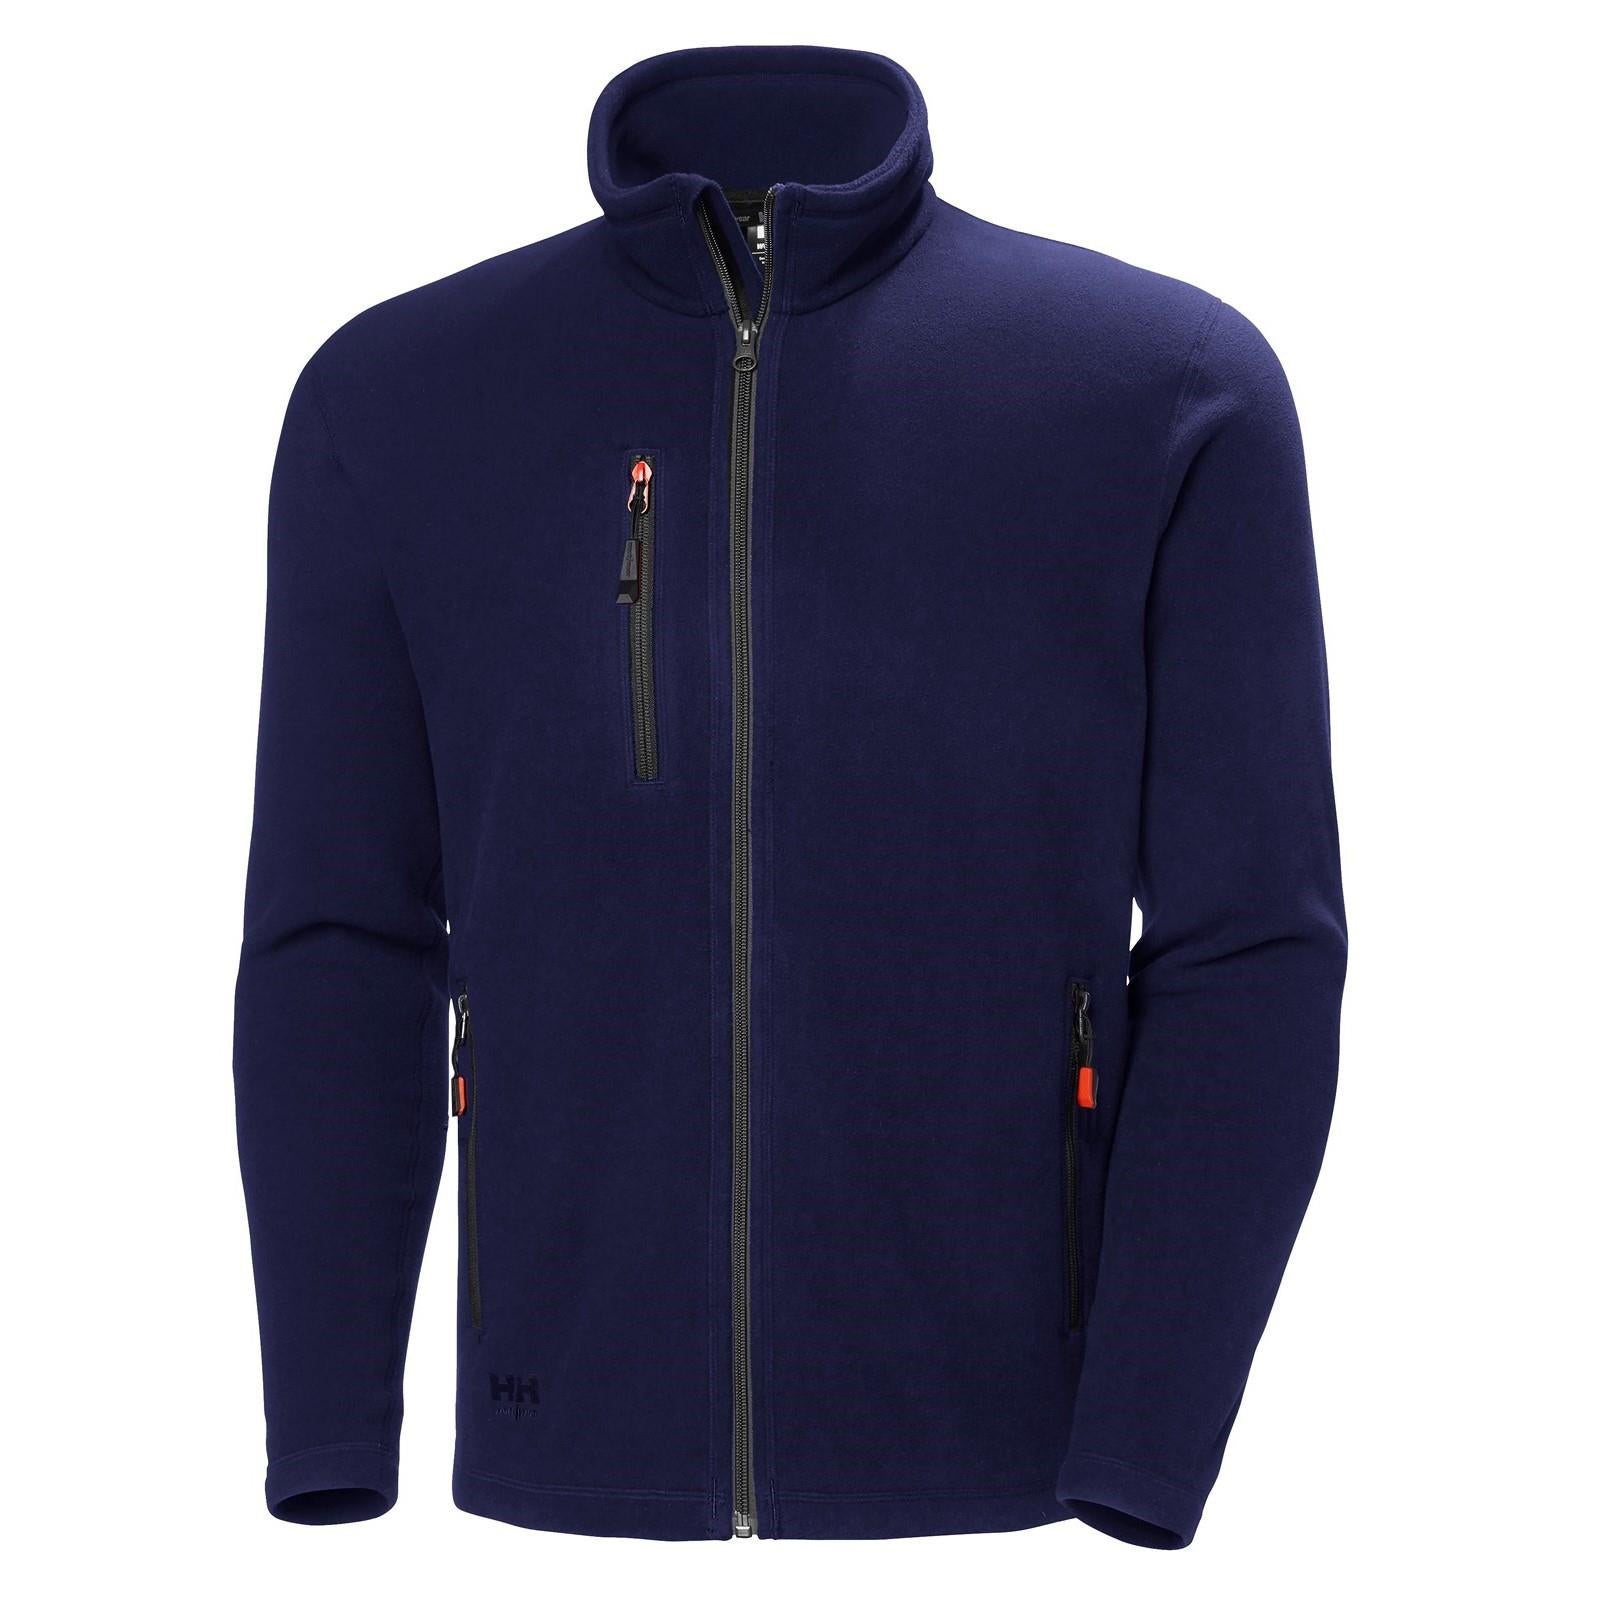 Helly Hansen Oxford navy recycled material fleece jacket #72026